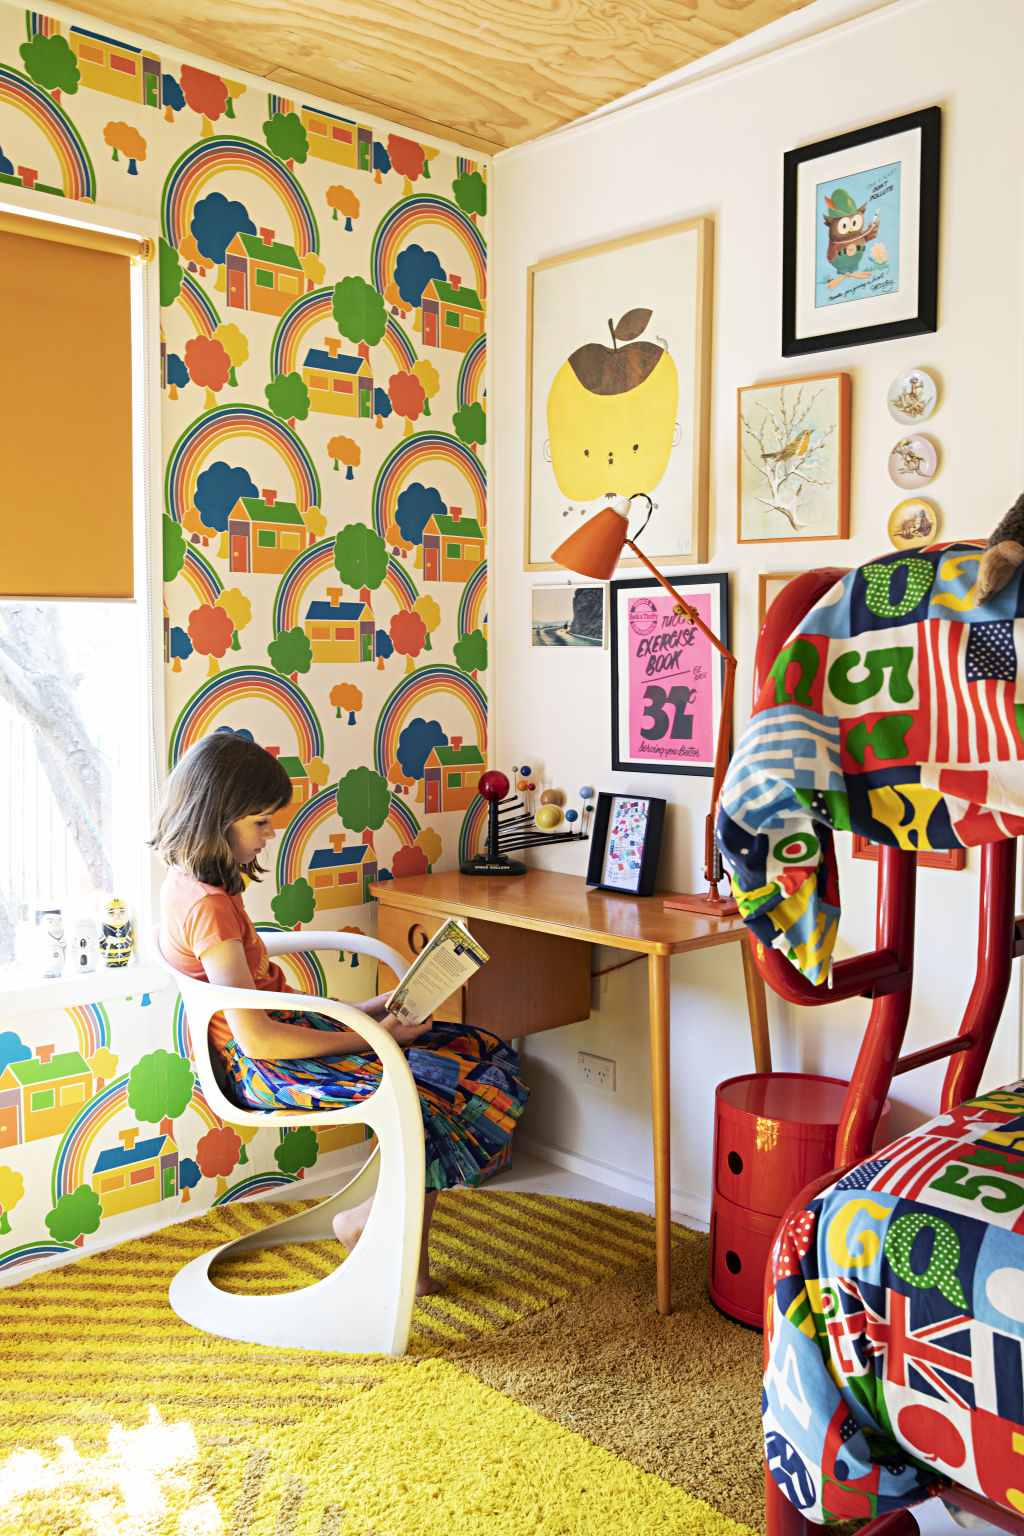 Daughter Dot's room is an explosion of colour, too. Photo: NATALIE JEFFCOTT